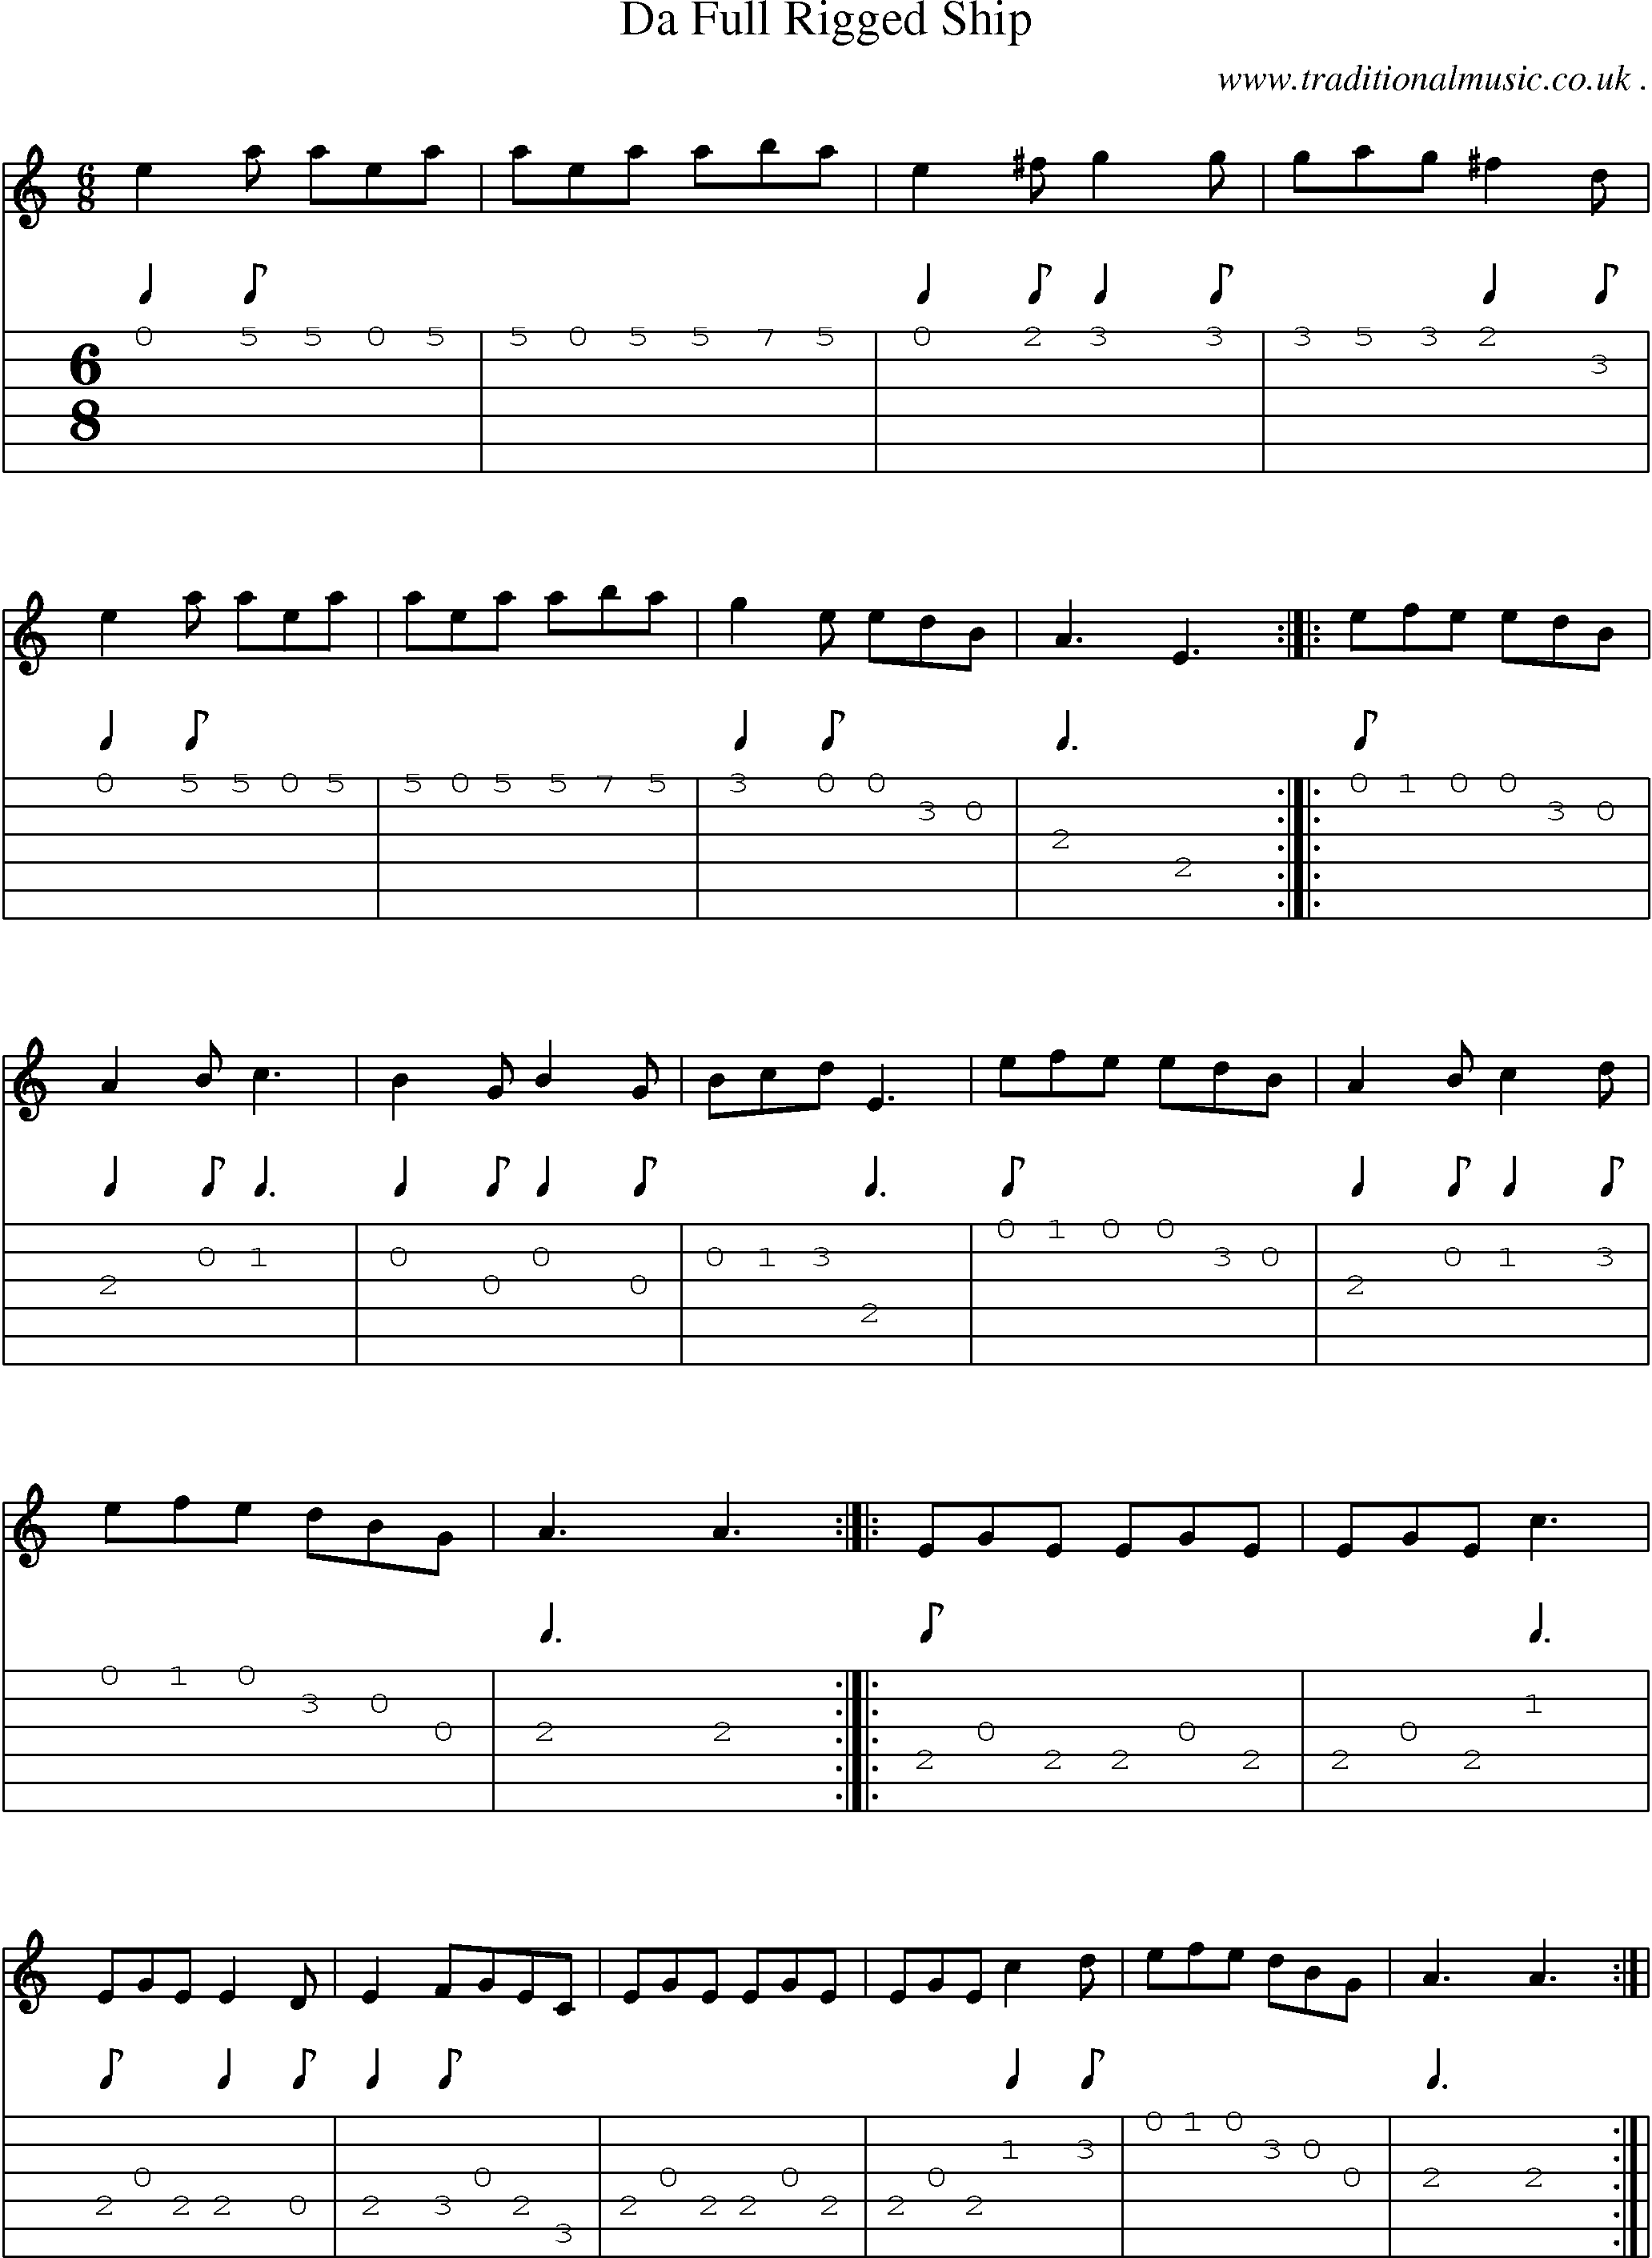 Sheet-Music and Guitar Tabs for Da Full Rigged Ship